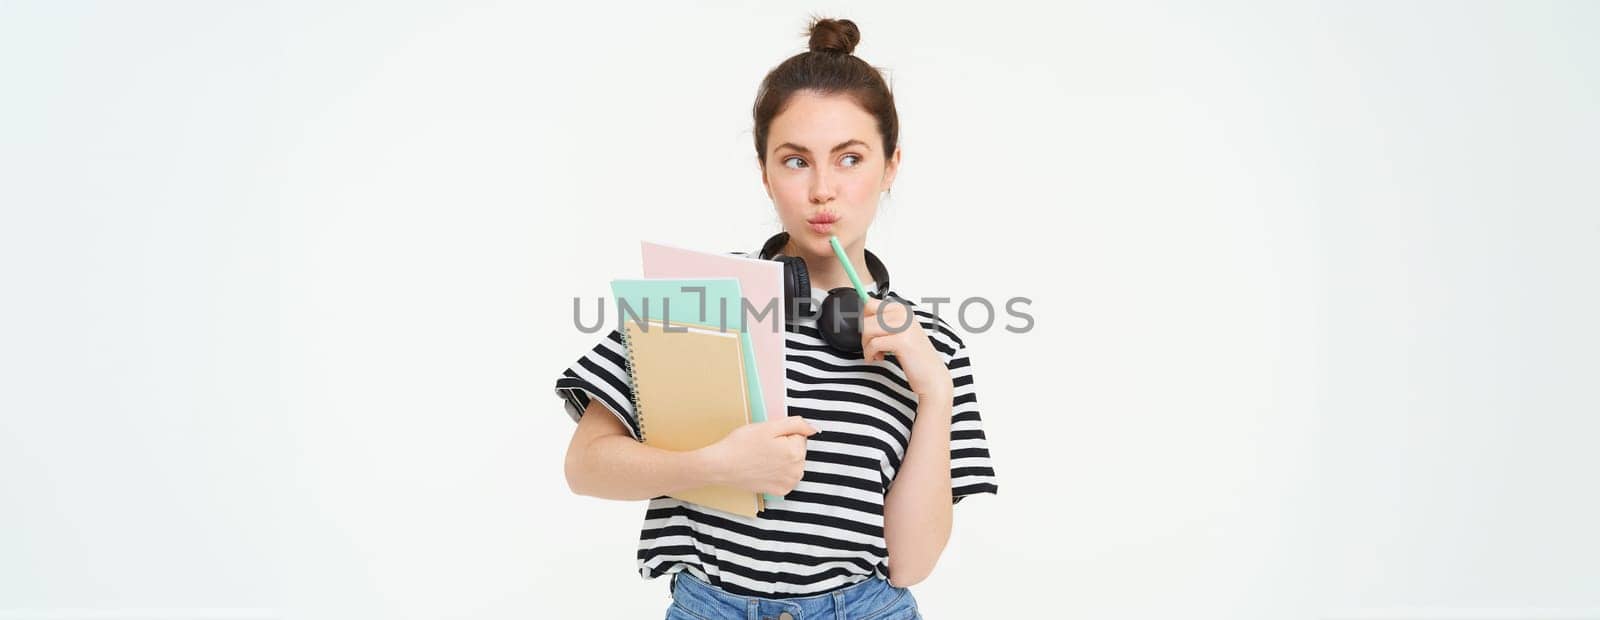 Student and education concept. Young woman with books, notes and pen standing over white background, college girl with headphones over neck posing in studio.